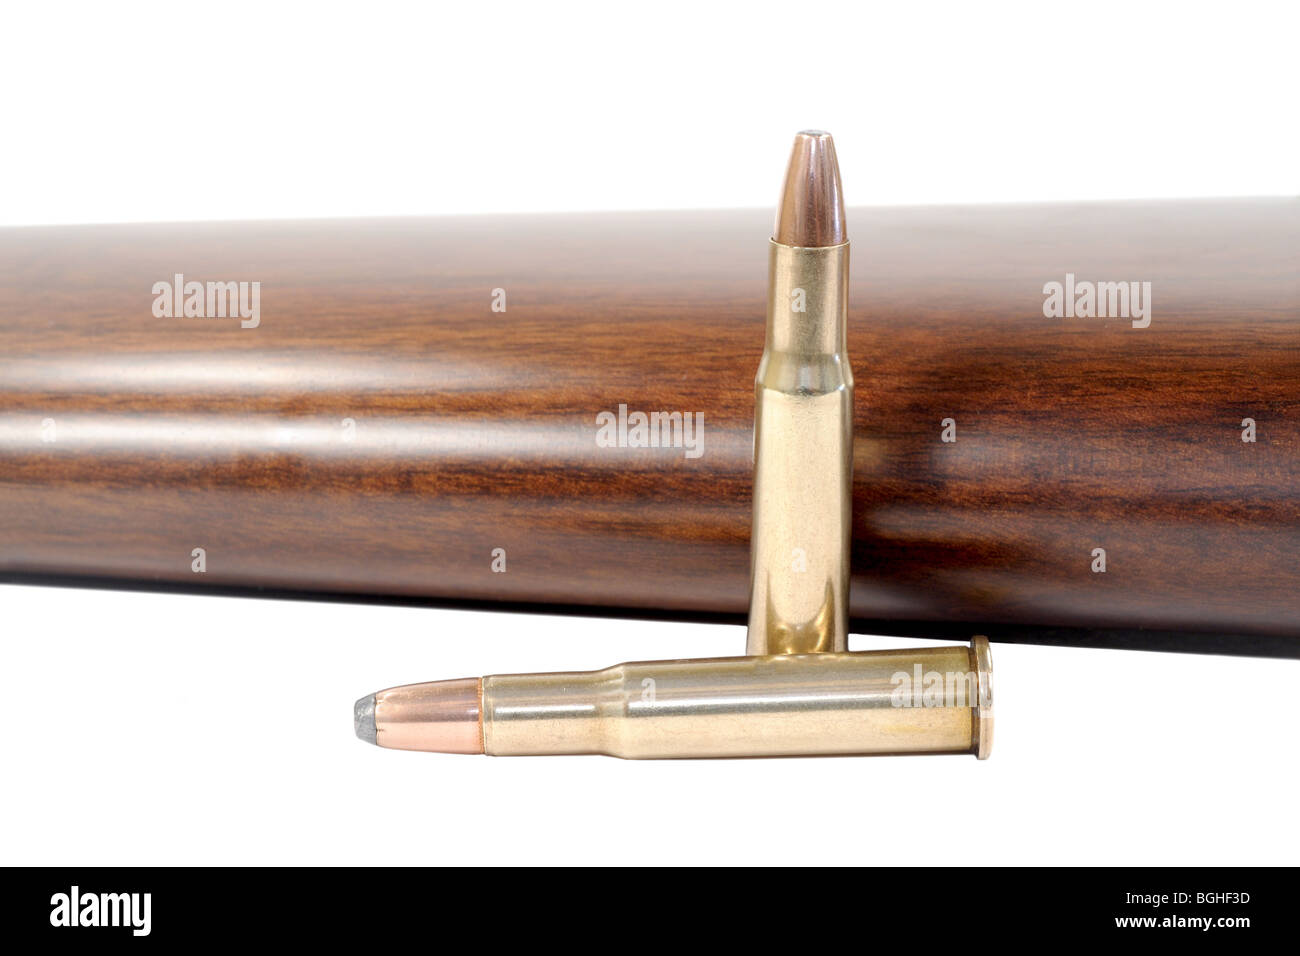 Macro shot of two bullets and a rifle stock Stock Photo